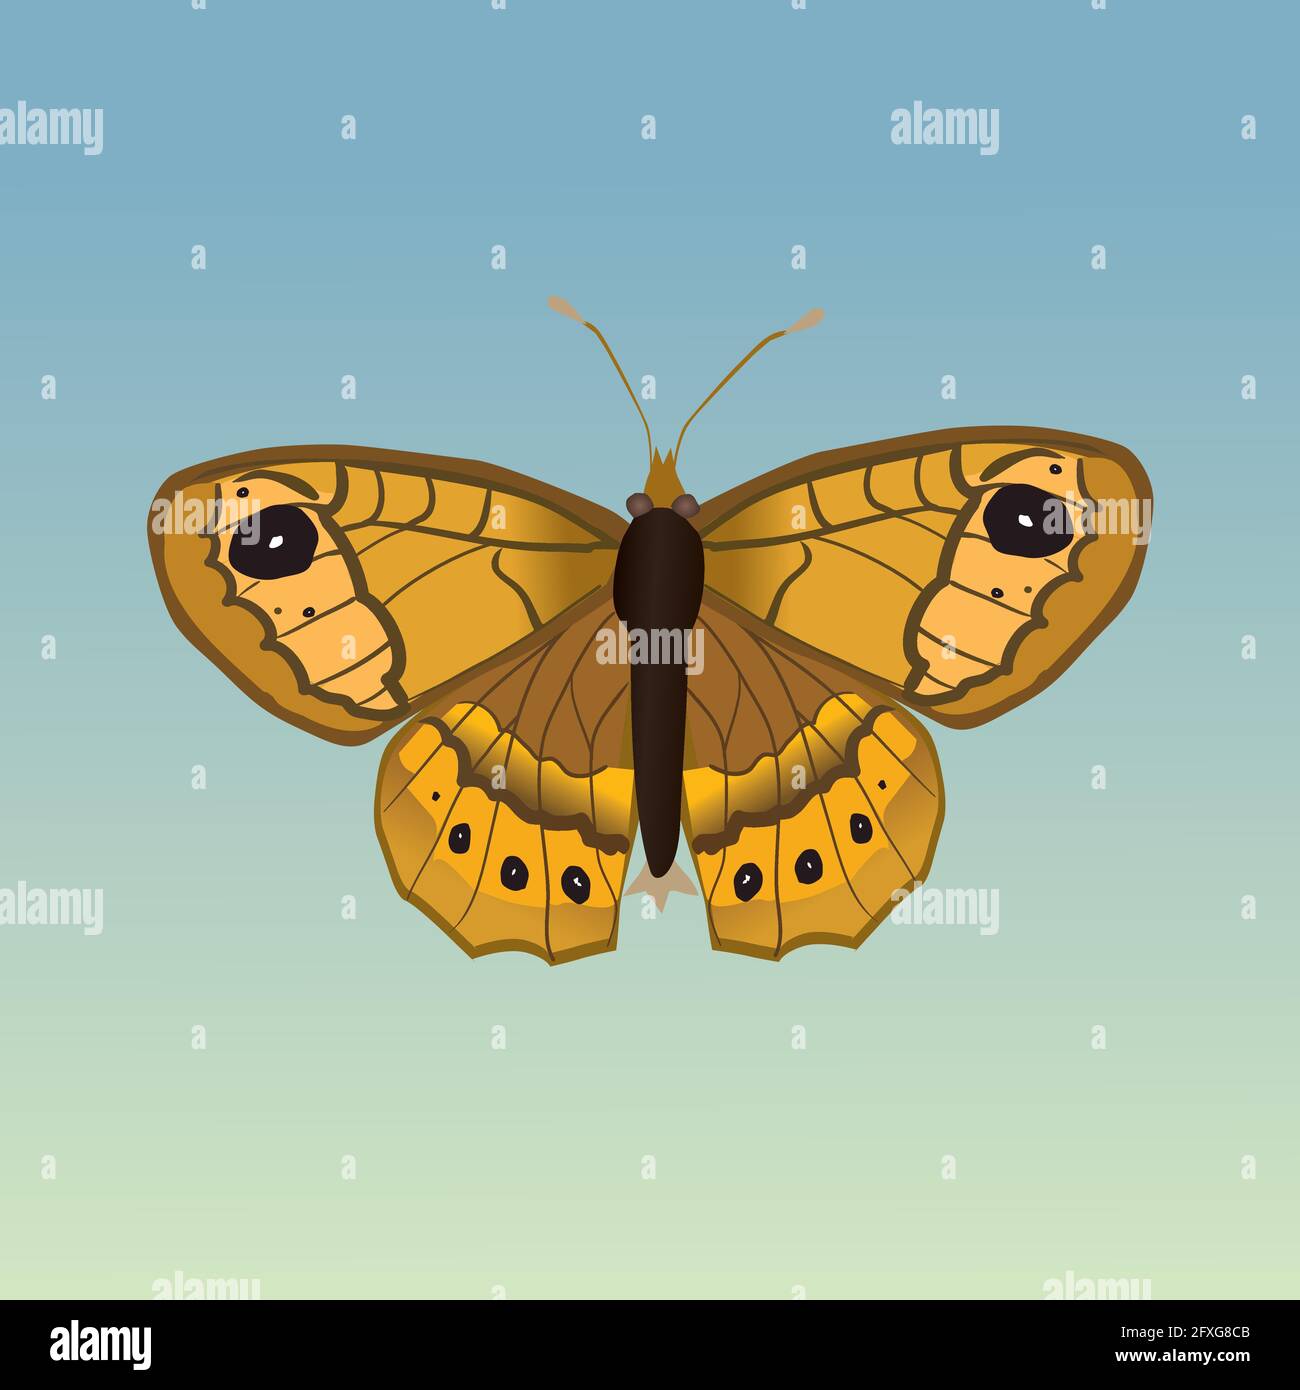 A vector illustration of a Lasiommata megera or wall brown butterfly The background is a light blue green gradient Stock Vector